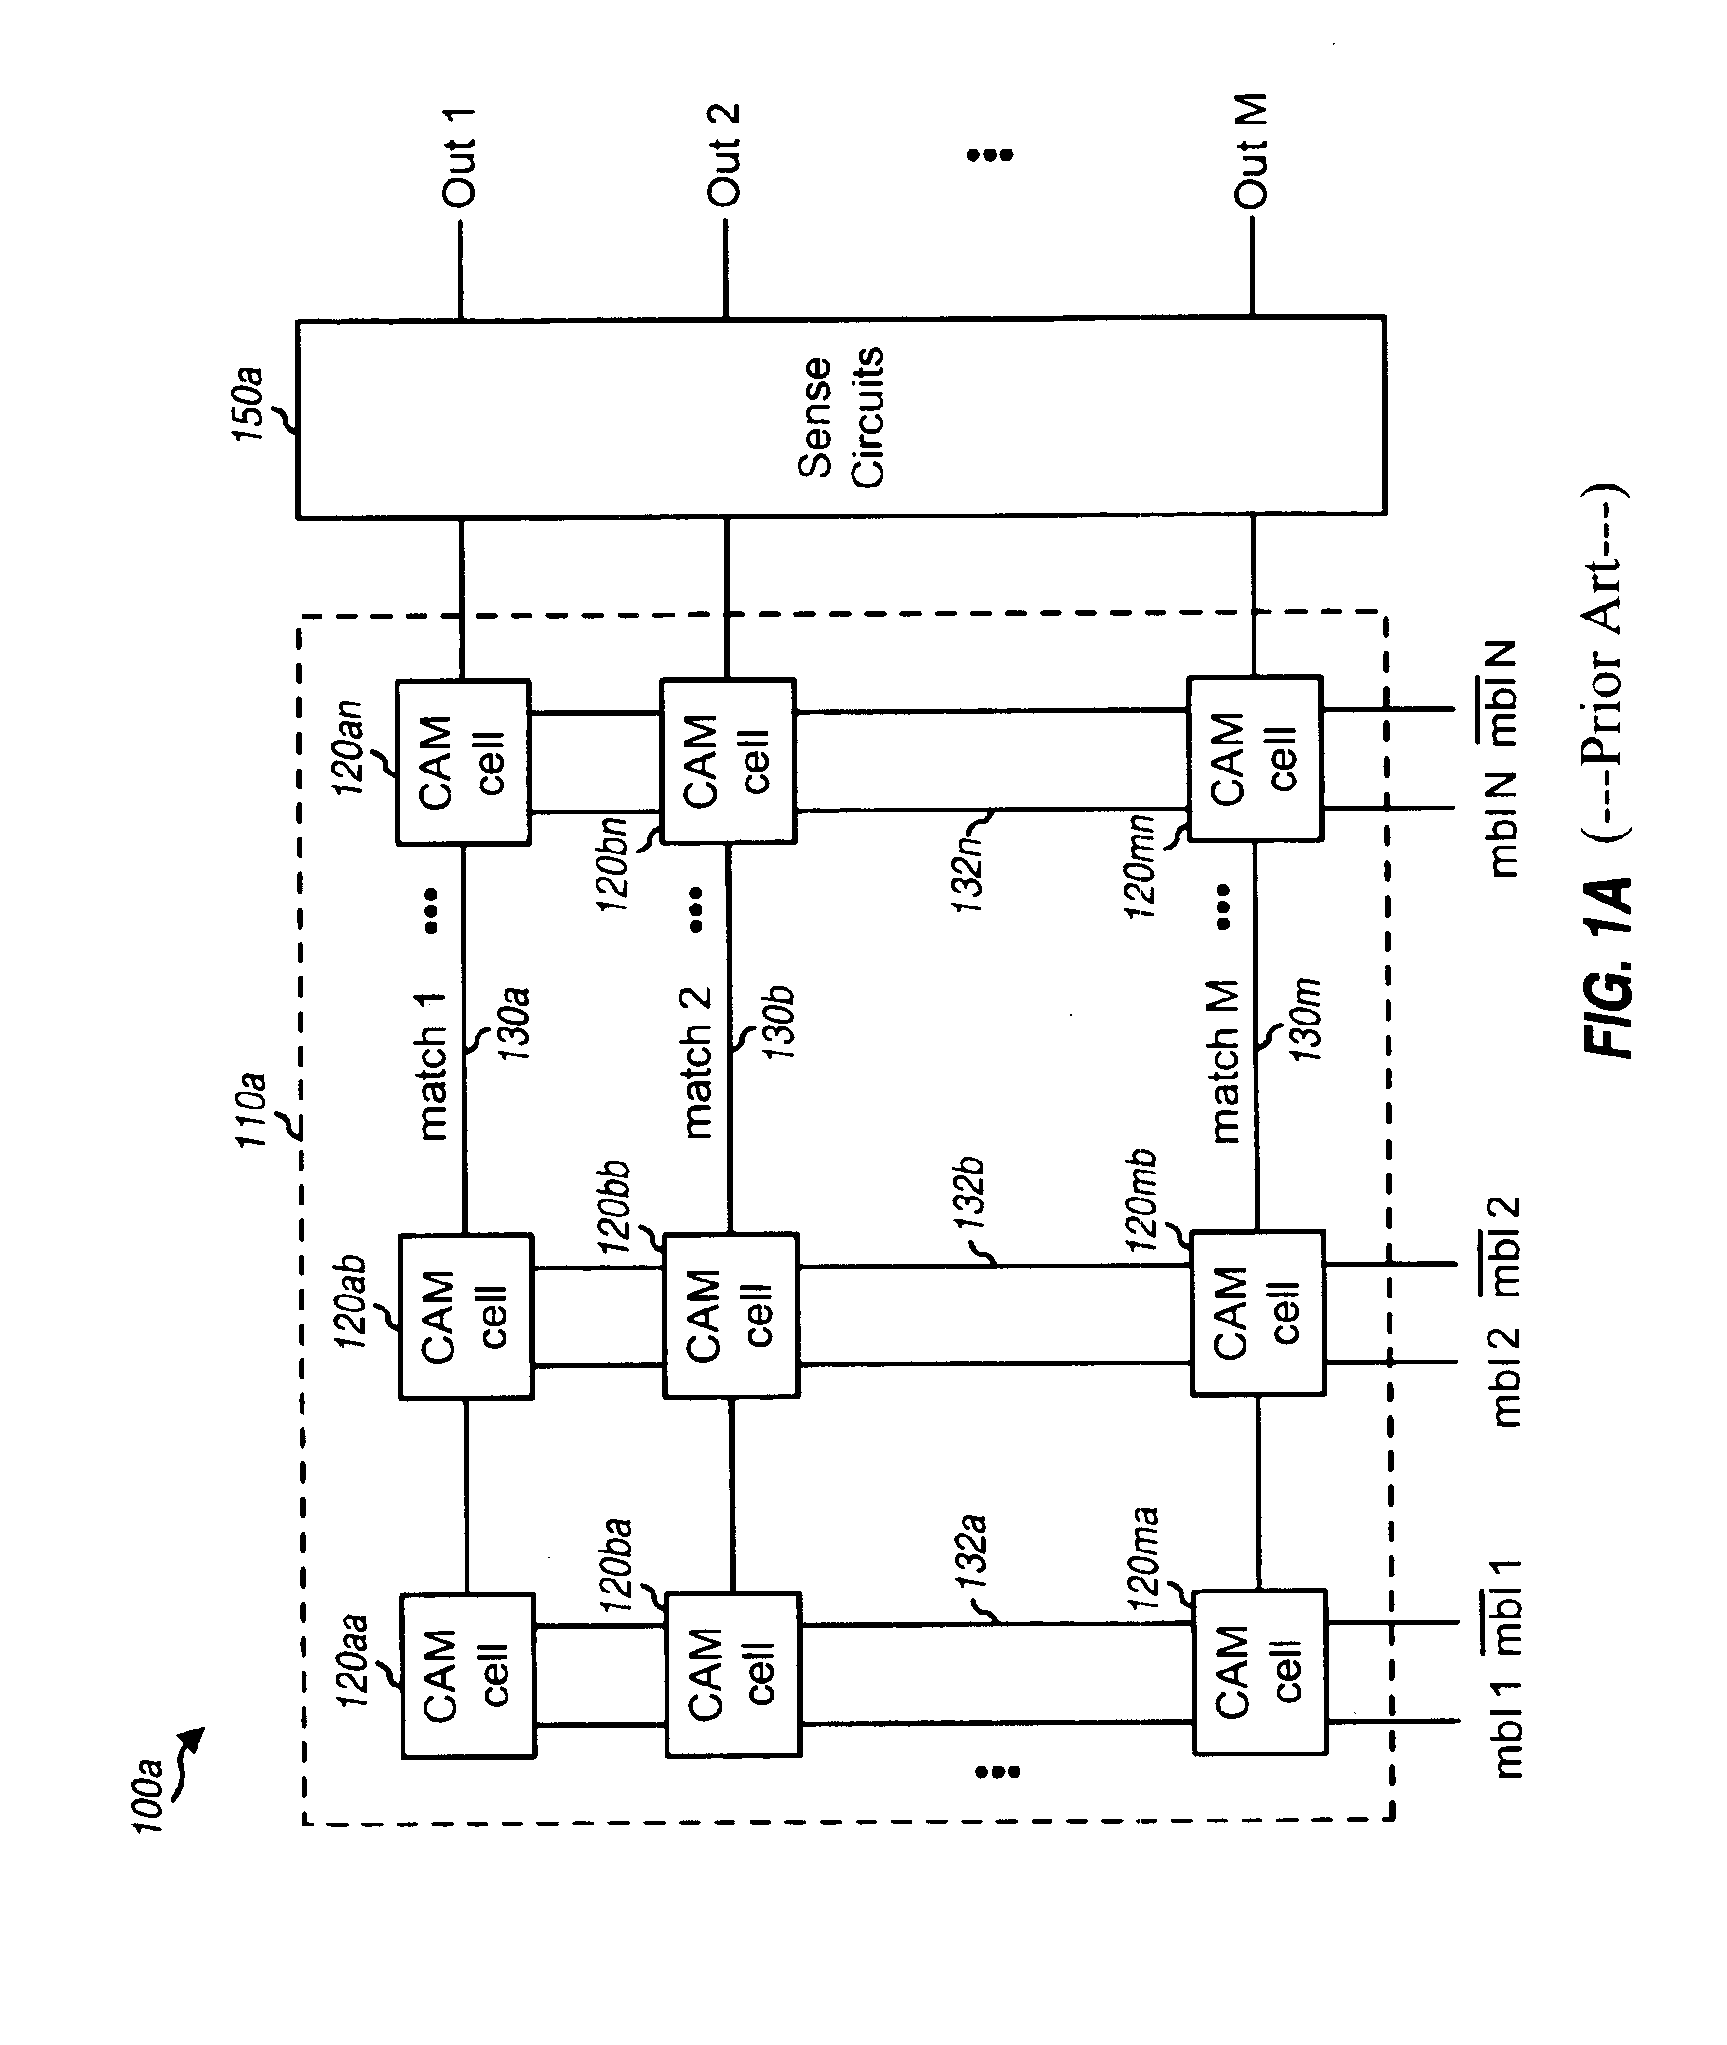 CAM cells and differential sense circuits for content addressable memory (CAM)